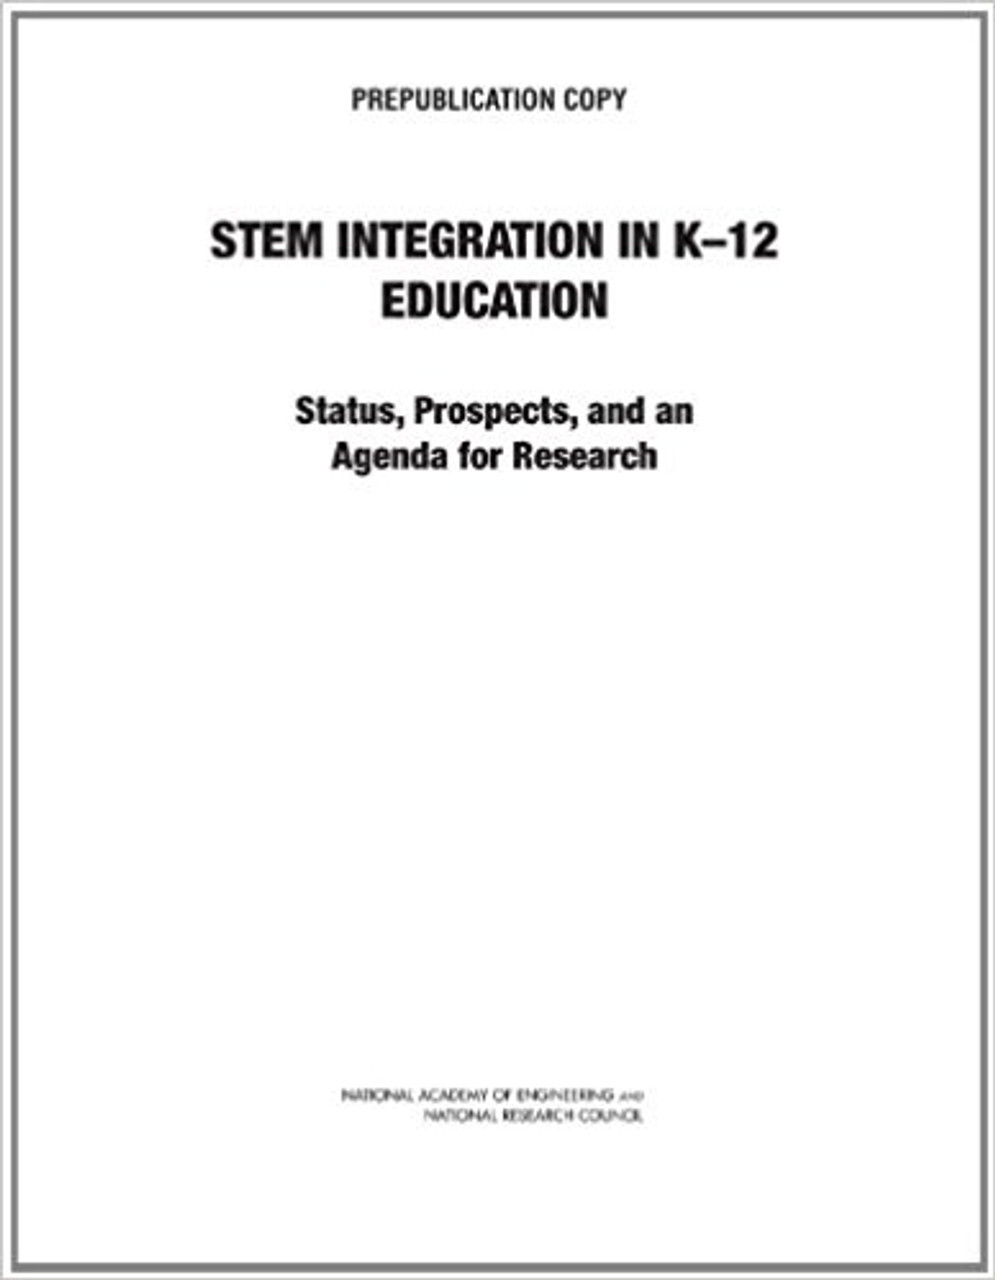 STEM Integration in K-12 Education: Status, Prospects, and an Agenda for Research by National Research Council